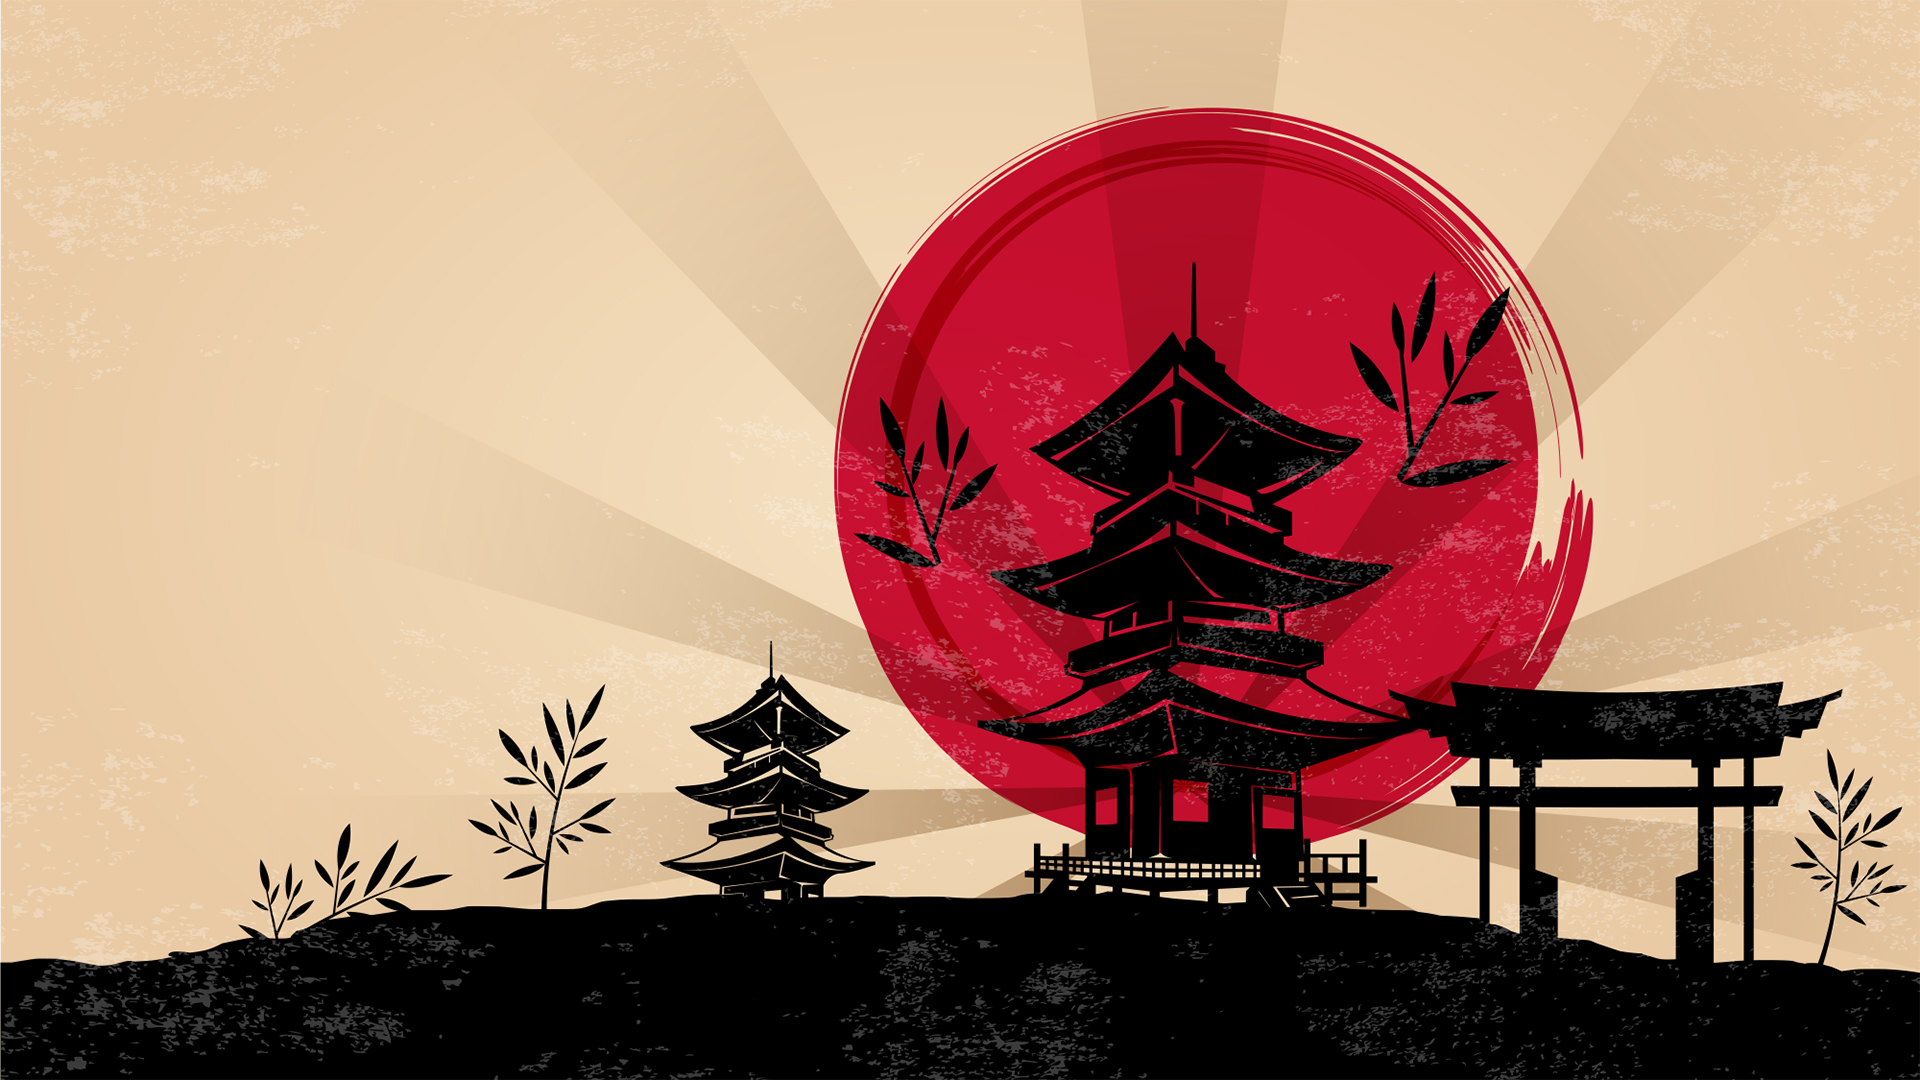 japan travel powerpoint template